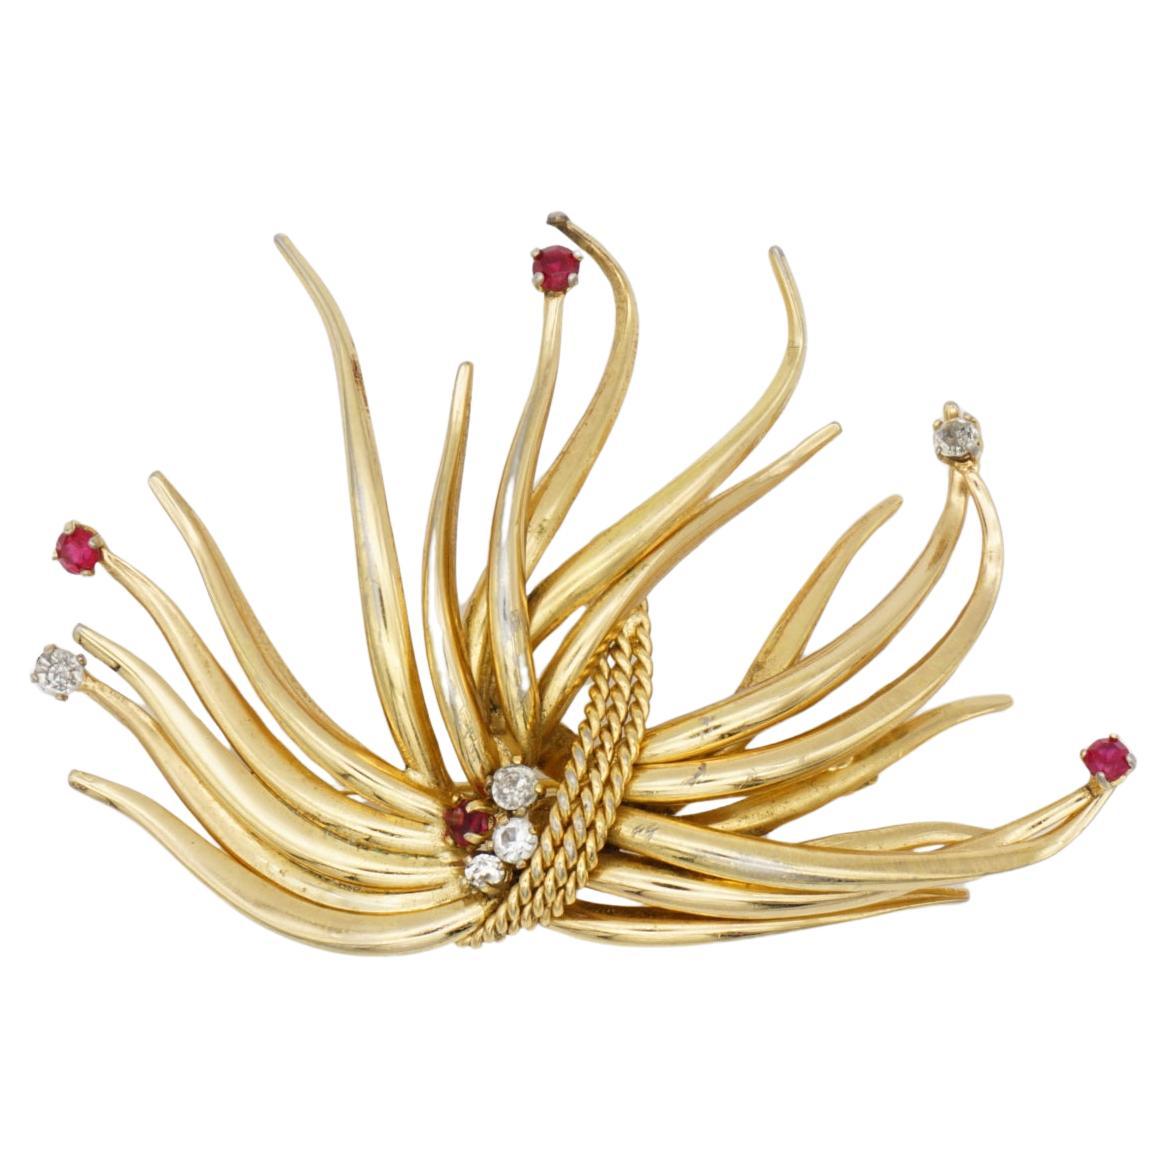 Christian Dior GROSSE 1962 Vintage Large Intertwined Flower Ruby Crystals Brooch For Sale